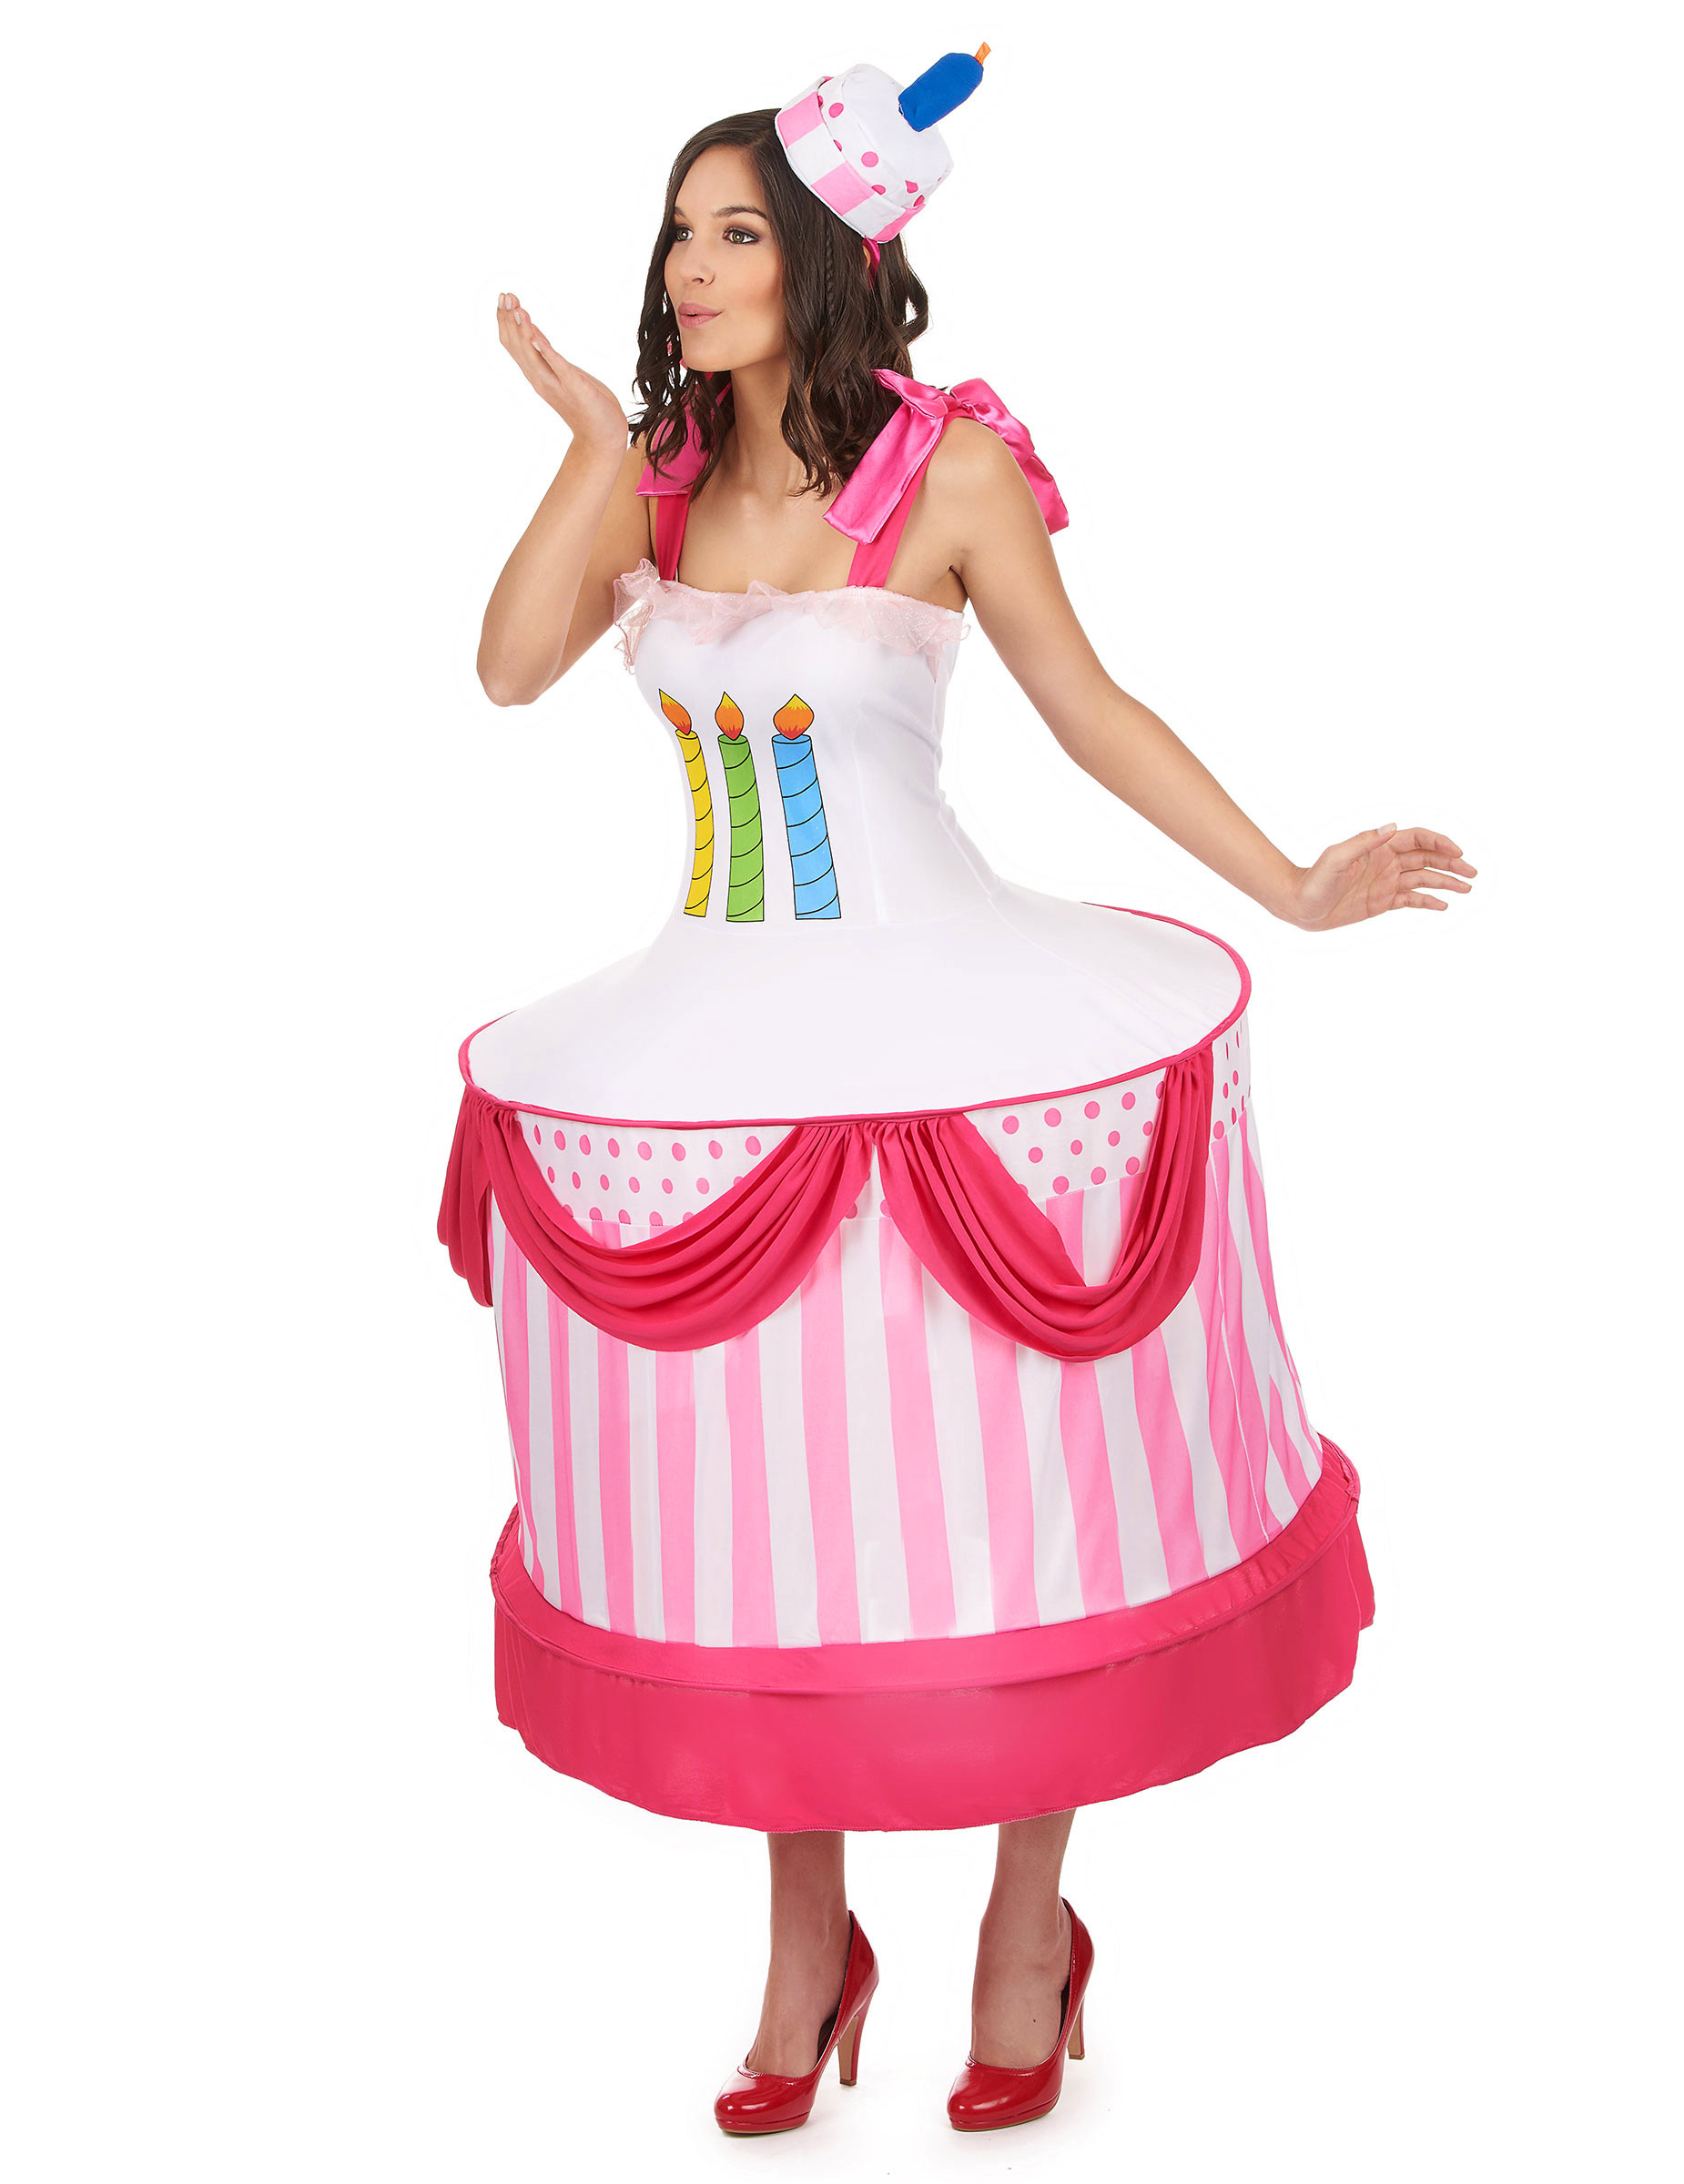 Save or Pin Birthday cake costume for women Adults Costumes and fancy Now. 